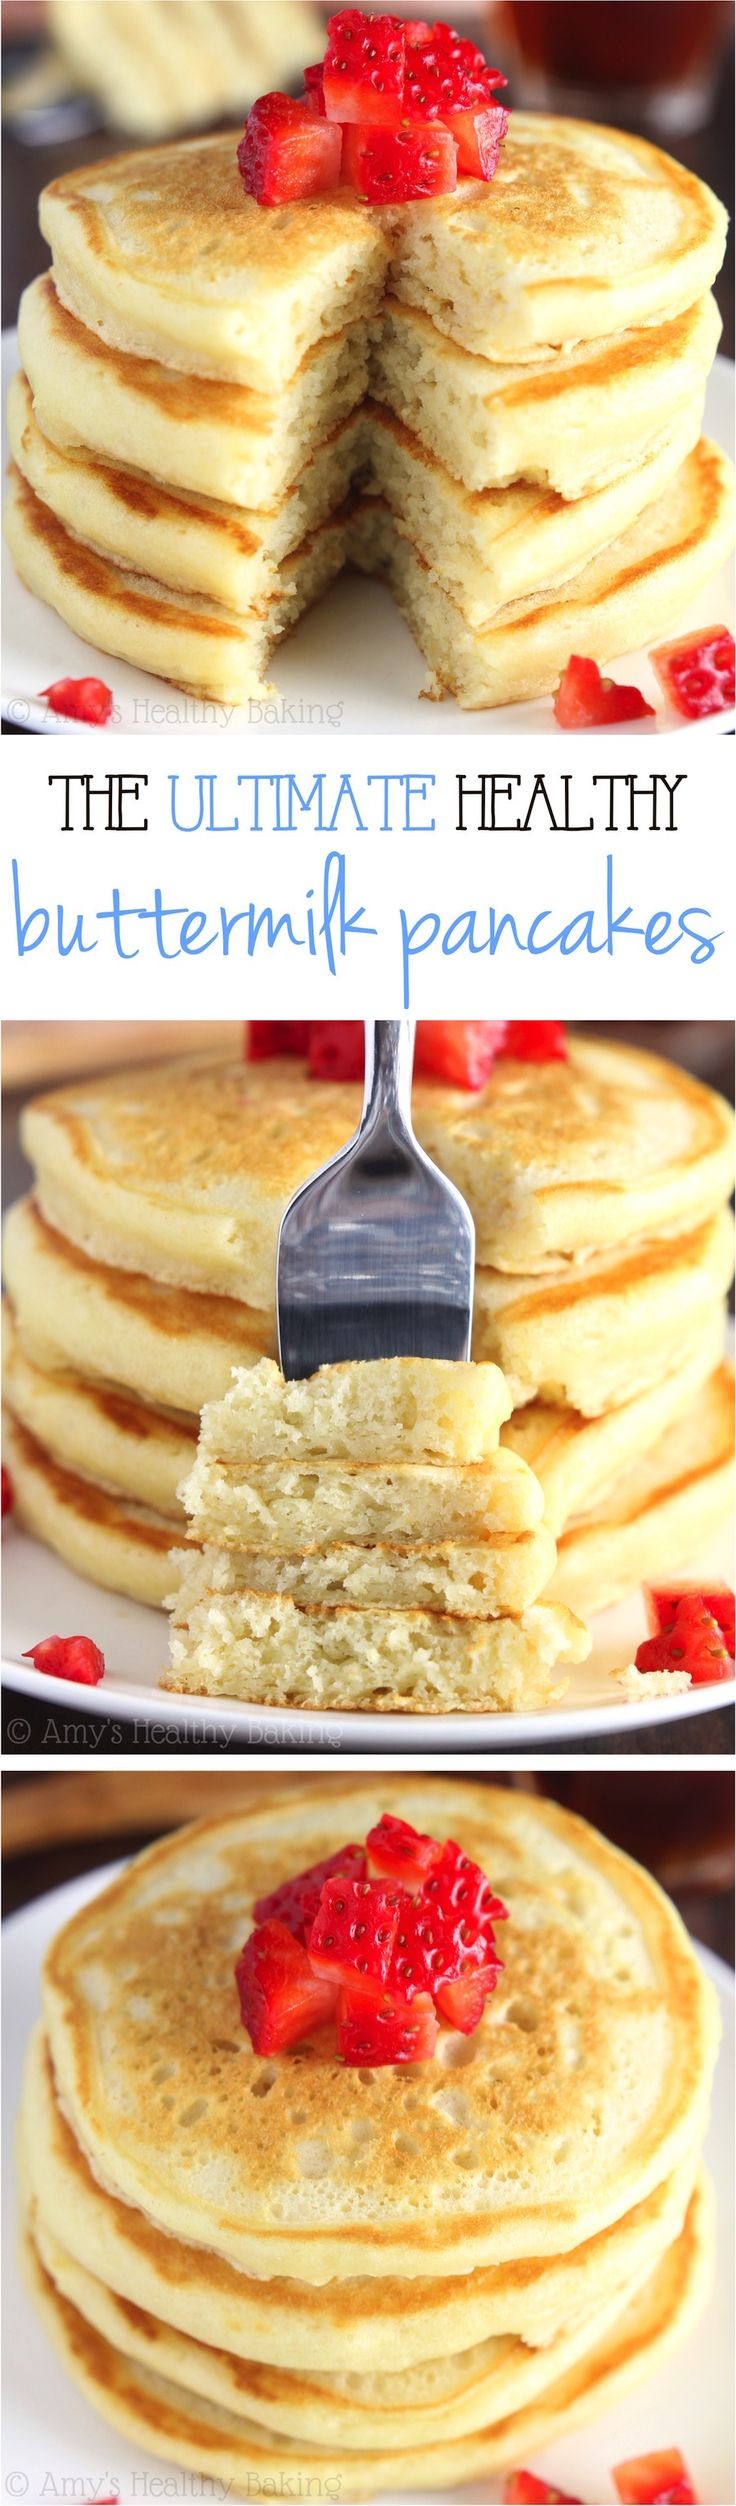 The Ultimate Healthy Buttermilk Pancakes -- so lig...